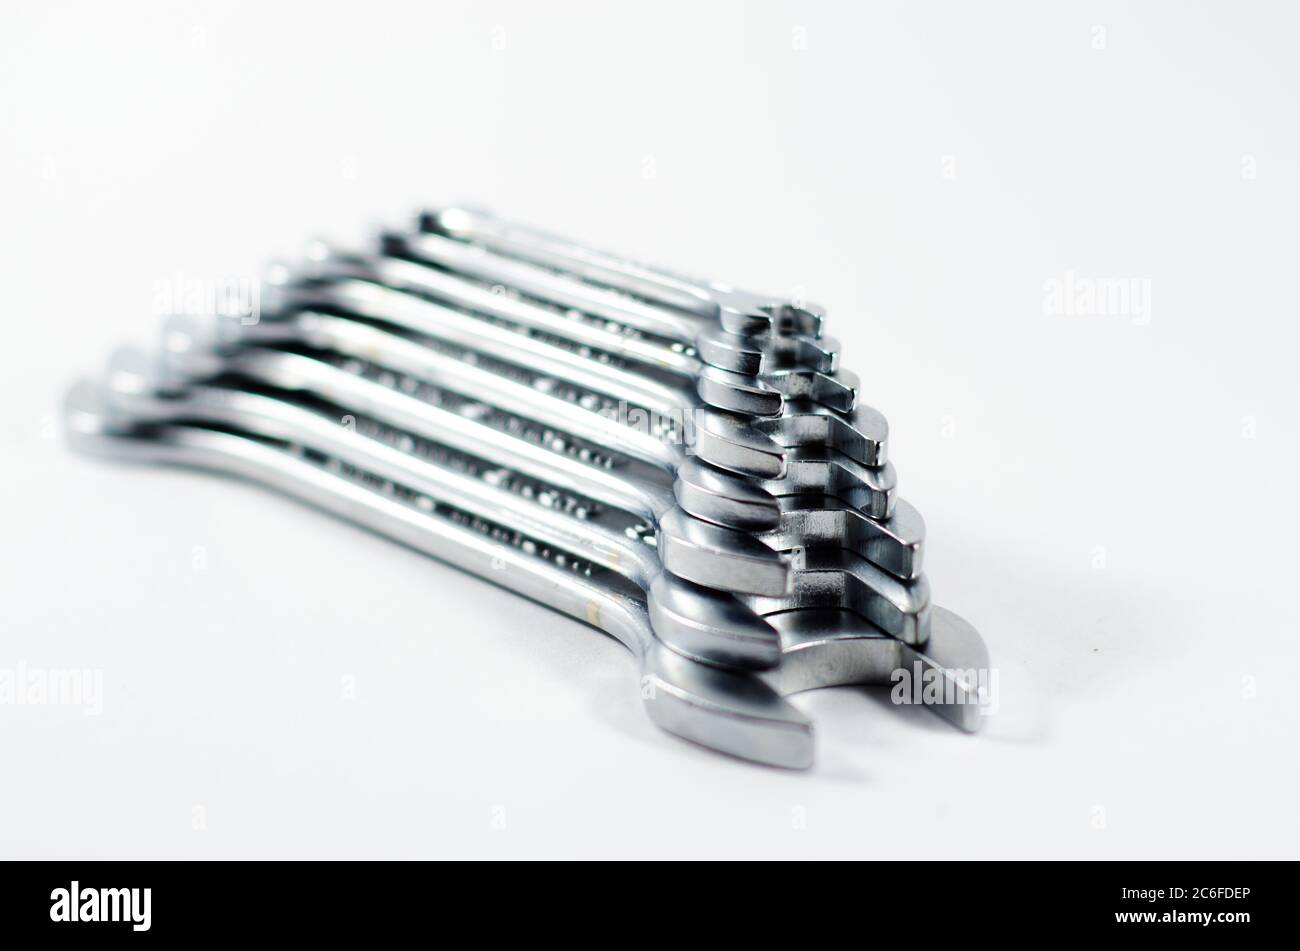 Set of Wrenches for professional or home purpose Stock Photo